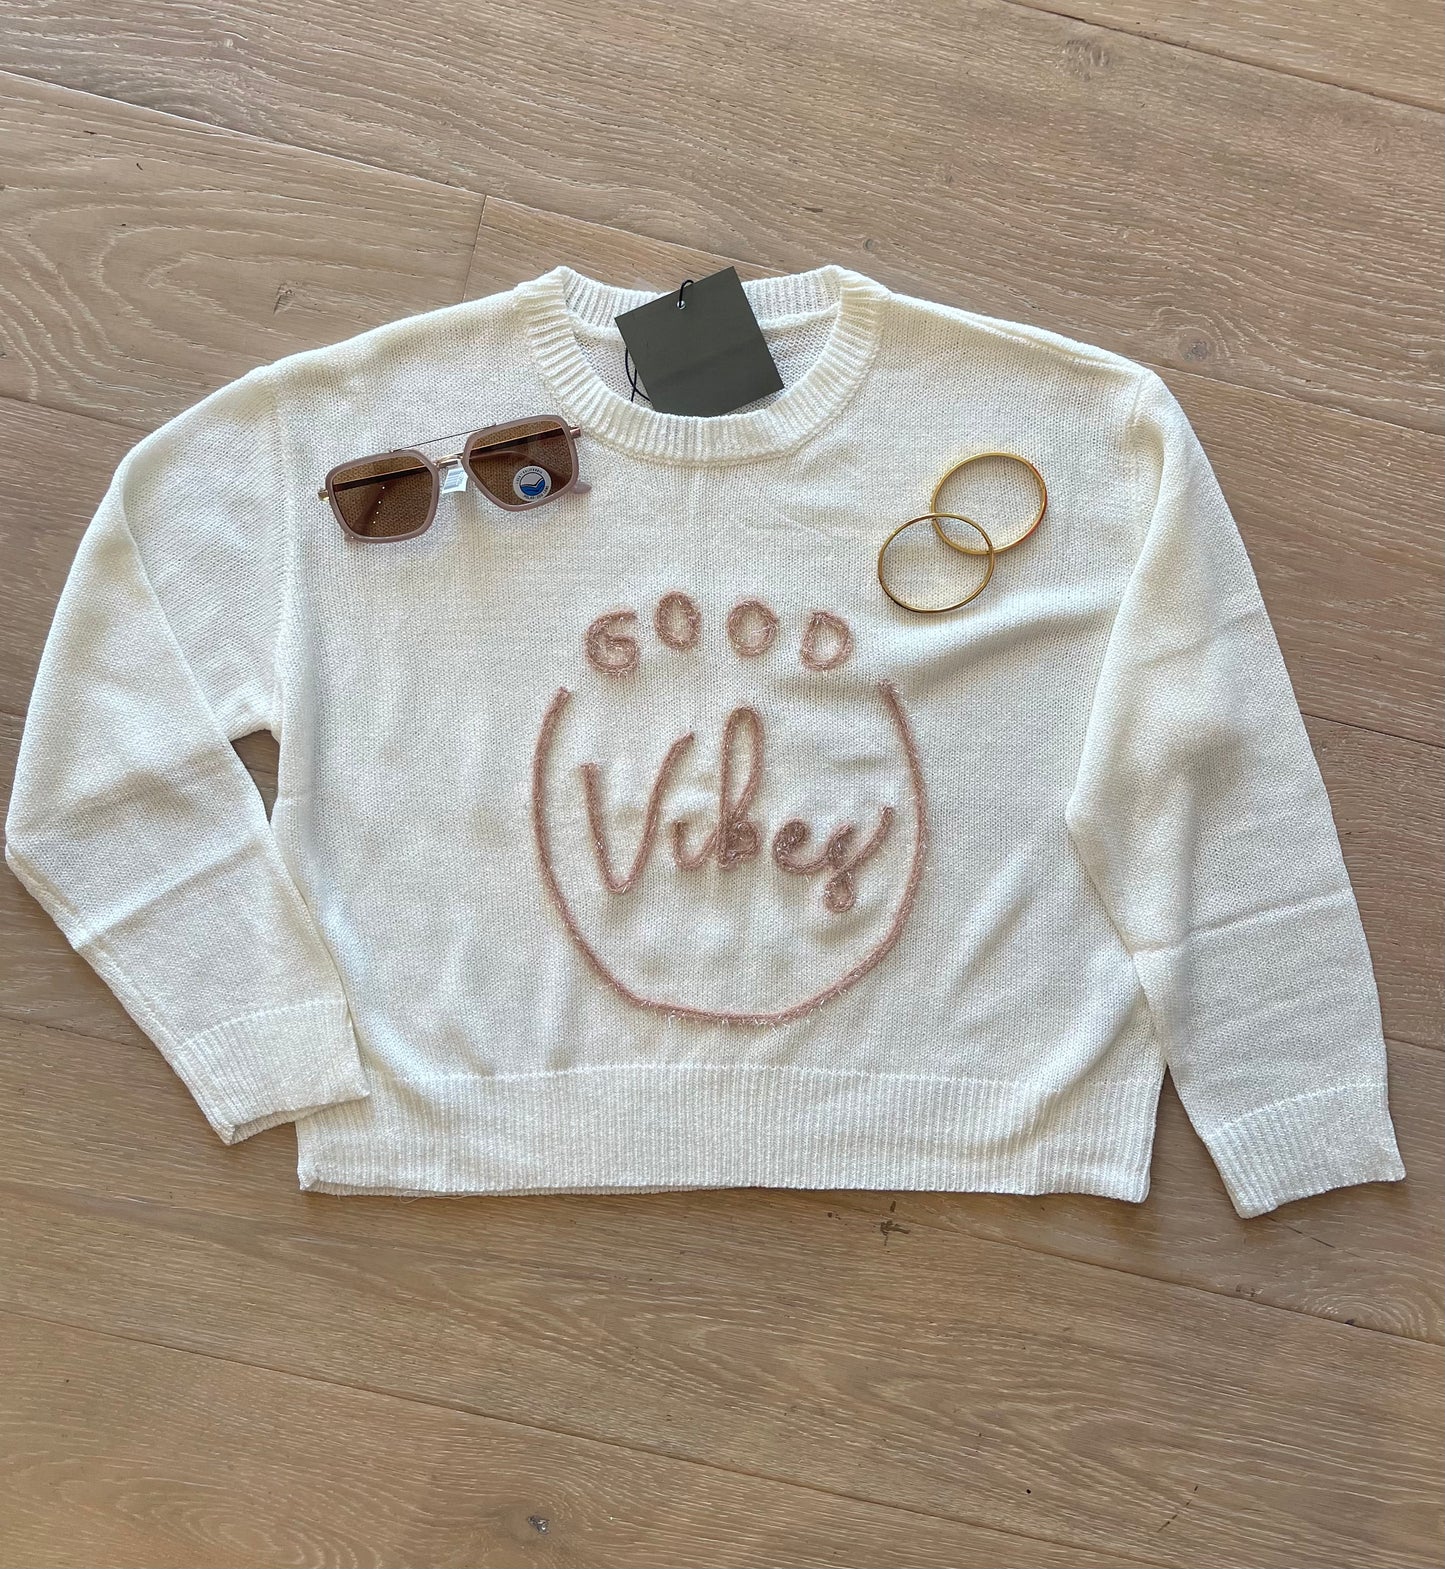 “Good Vibes” Pullover Light Weight Sweater